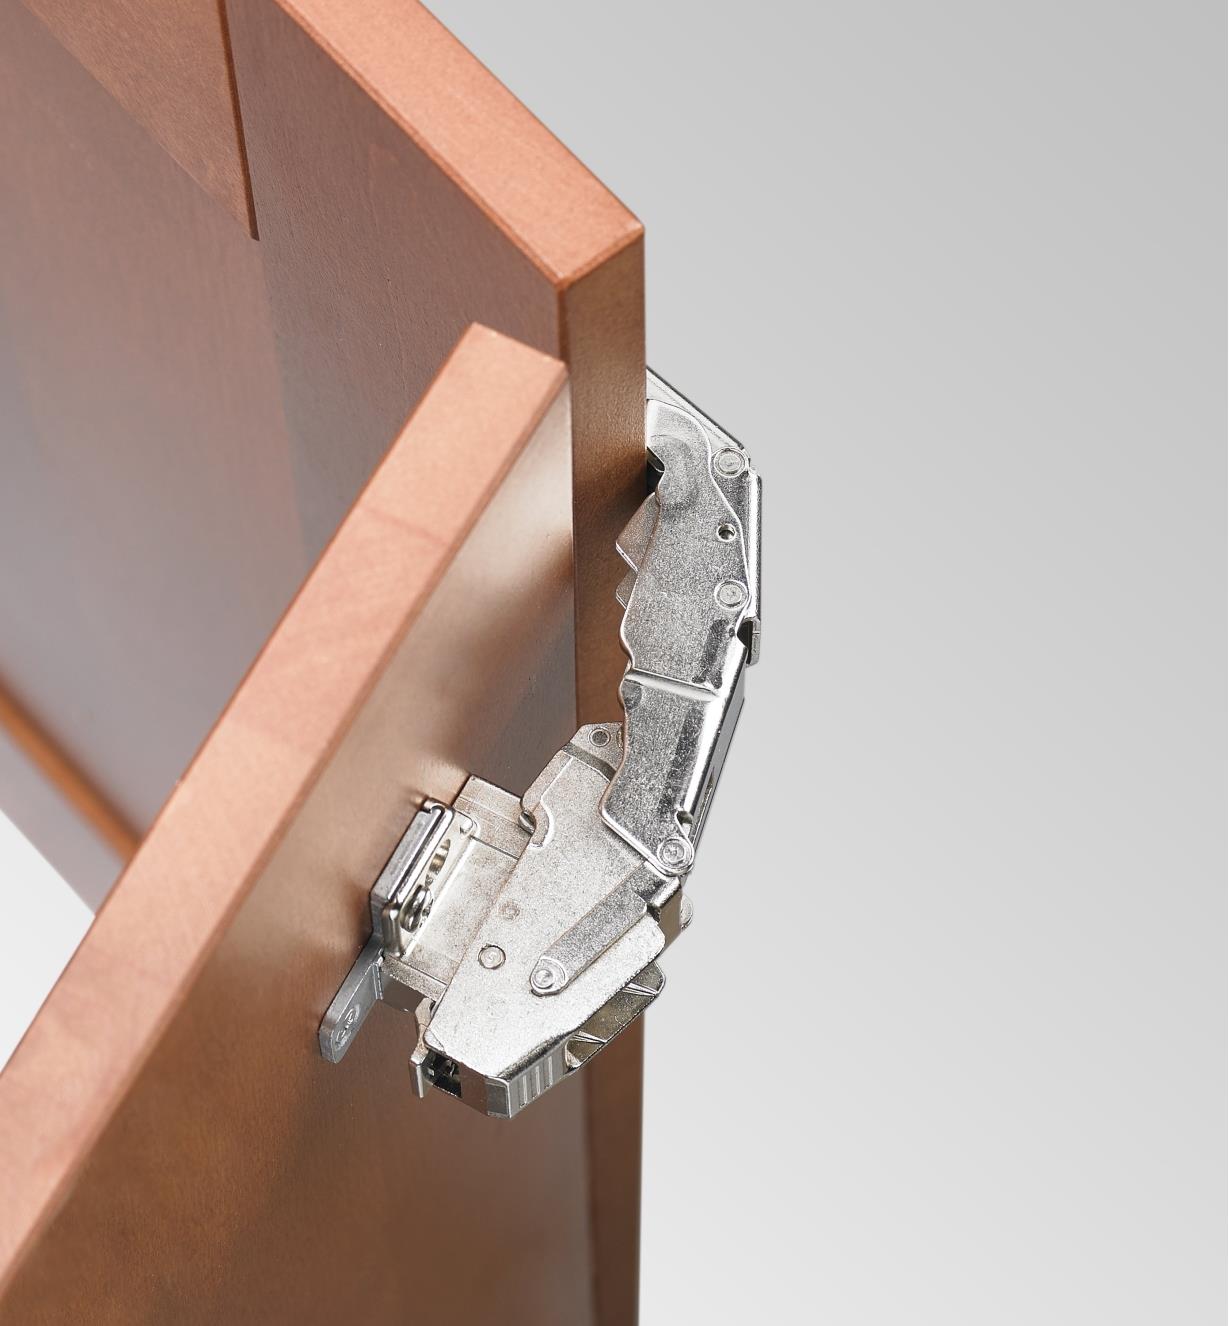 A cupboard door with standard 155° soft-close clip-top inset hinges opens to the maximum angle